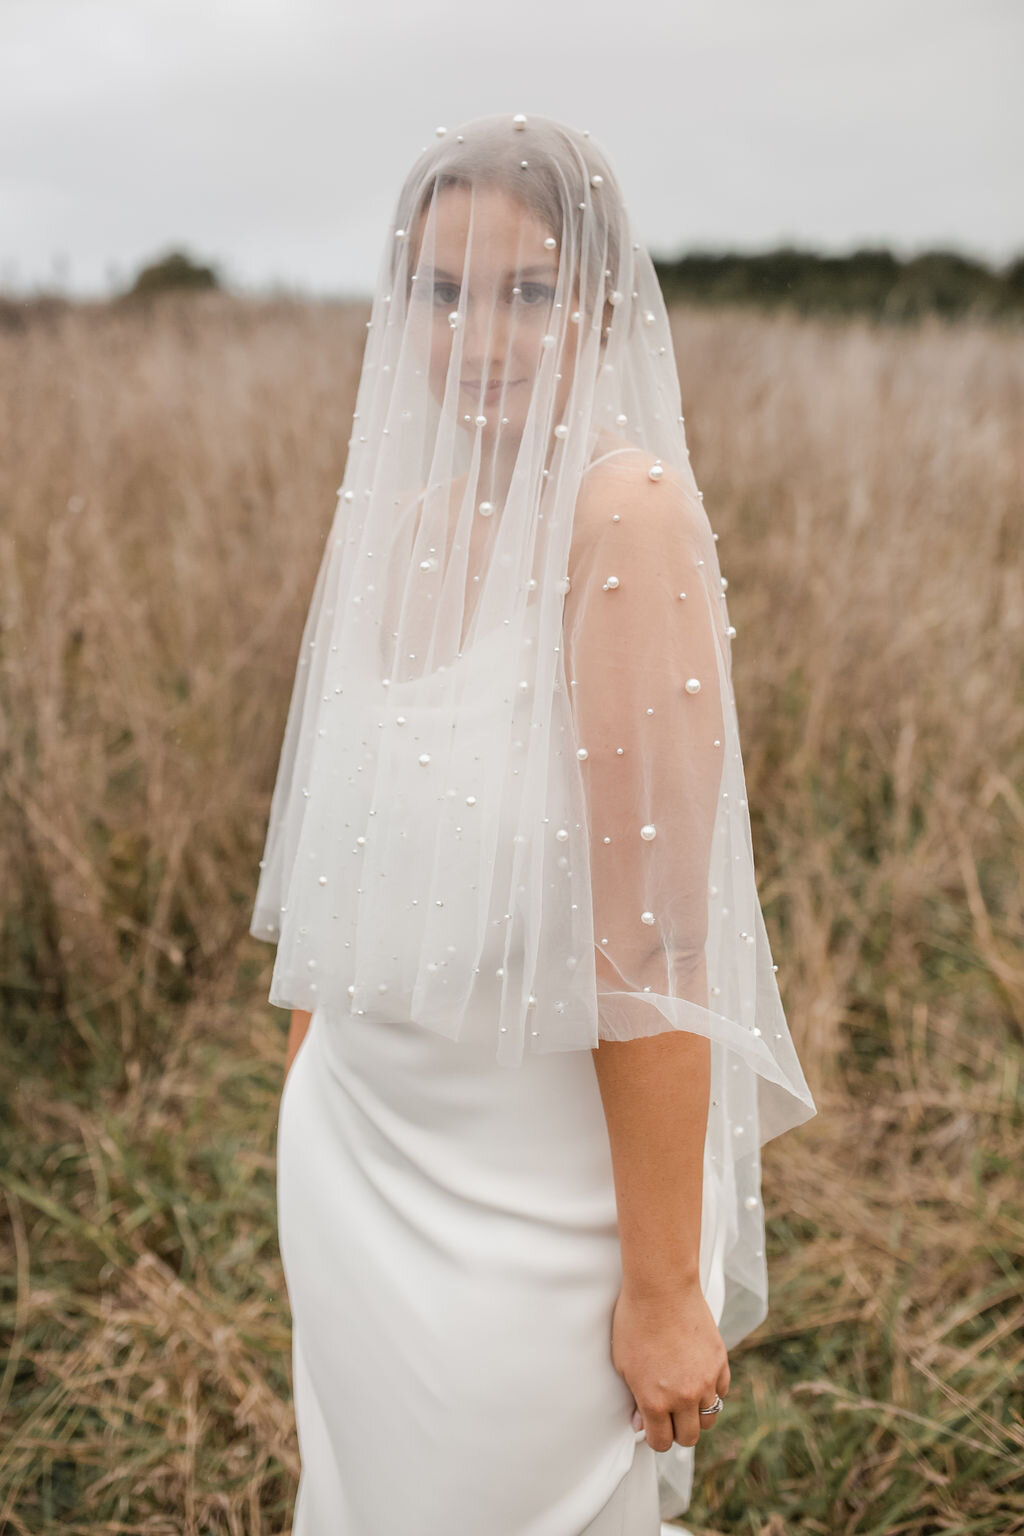 https://images.squarespace-cdn.com/content/v1/5d590f0a6611d5000176baa6/1589674613512-BYBPDPBHU2MD02DFTE5A/pearl-blusher-veil-gown-and-altar+%282%29.jpg?format=2500w